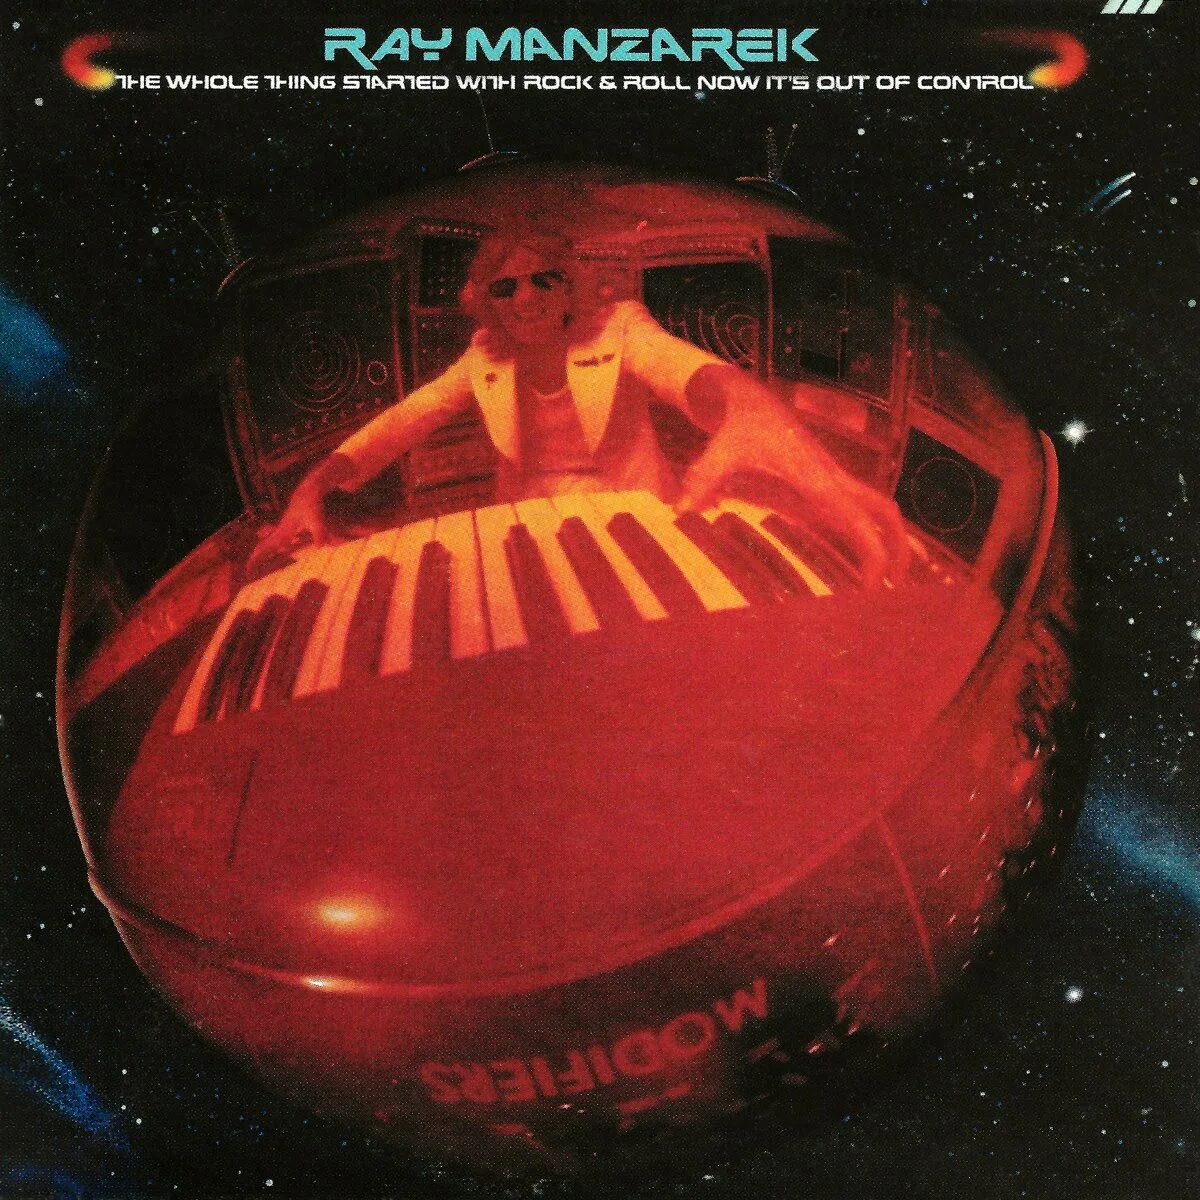 Ray Manzarek 1974 - the whole thing started with Rock & Roll and Now it's out of Control. Ray Manzarek Rock Roll. Ray Manzarek the Golden Scarab 1974. Ray Manzarek Rock Roll Cover.